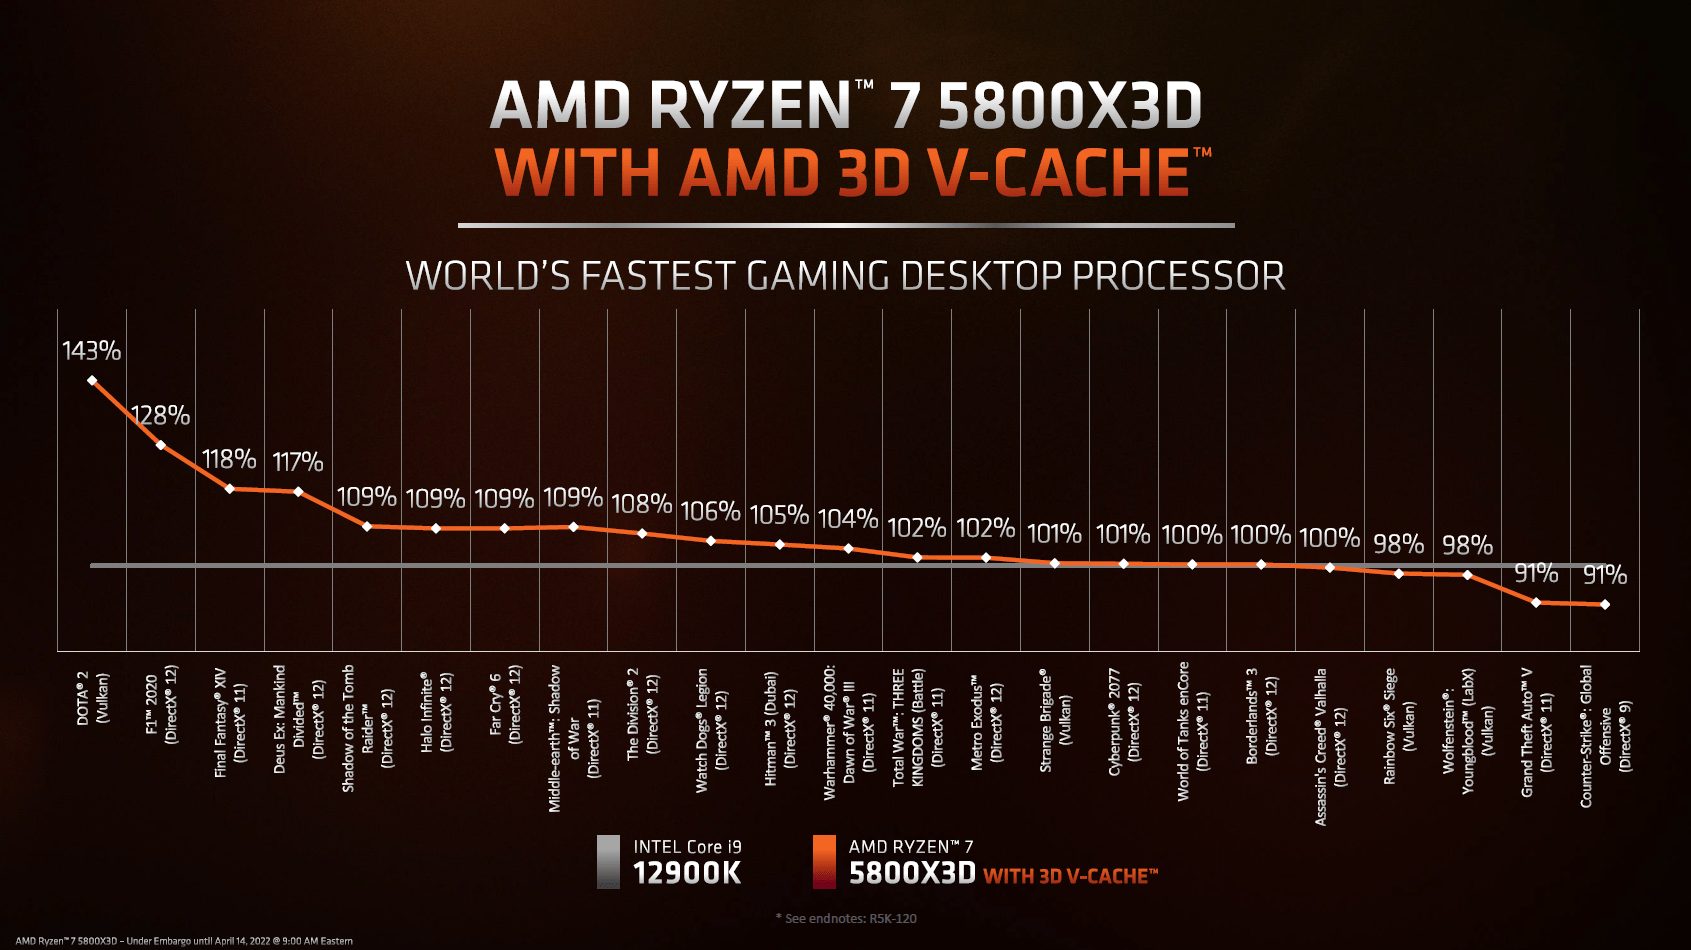 AMD Ryzen 7 5800X3D Put Through Rendering and Synthetic Benchmarks